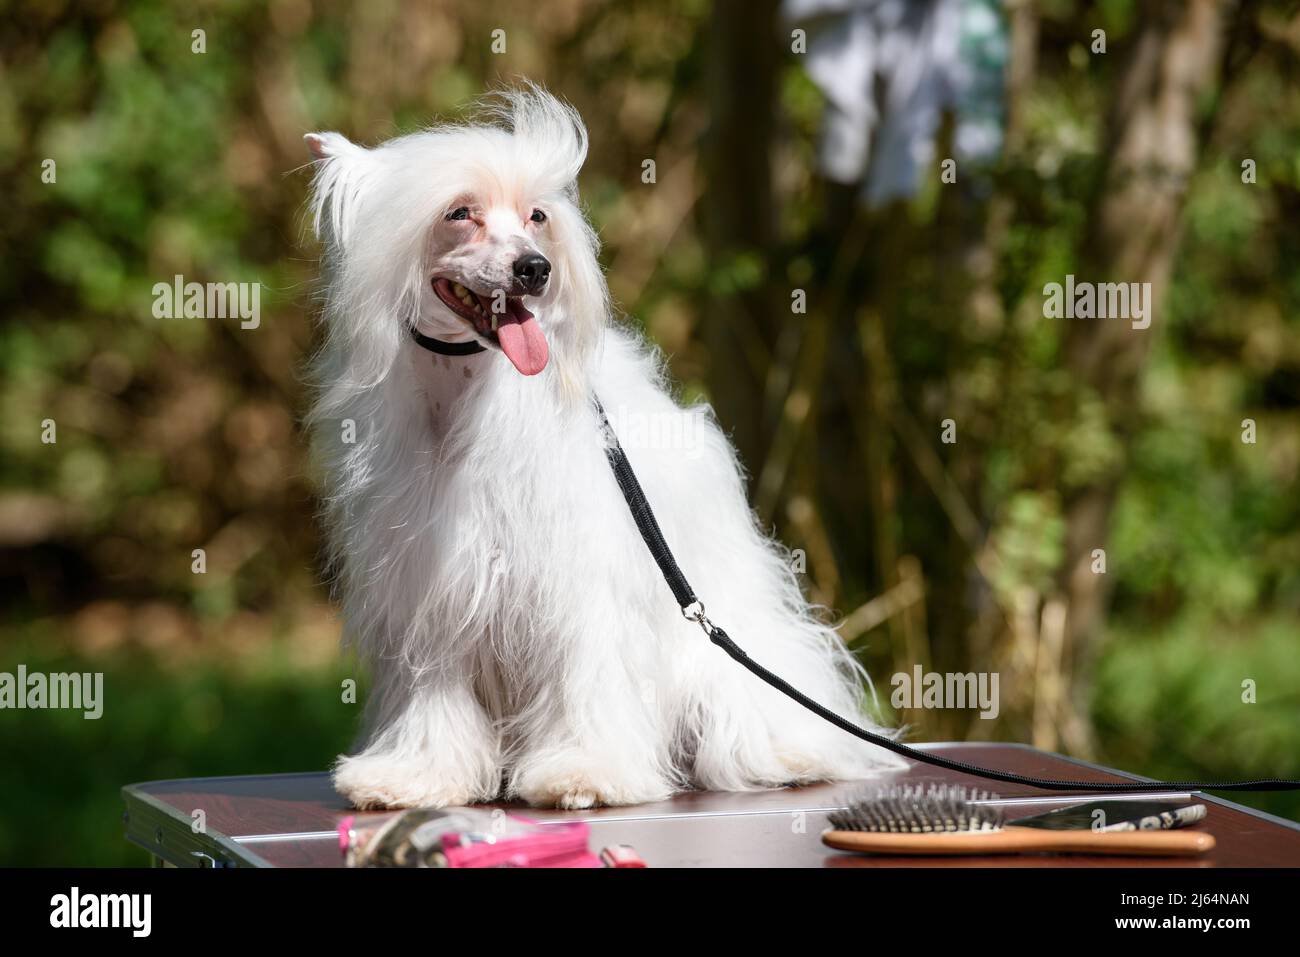 A white Chinese crested dog sits on a table standing outside against the backdrop of trees and looks to the left. Stock Photo